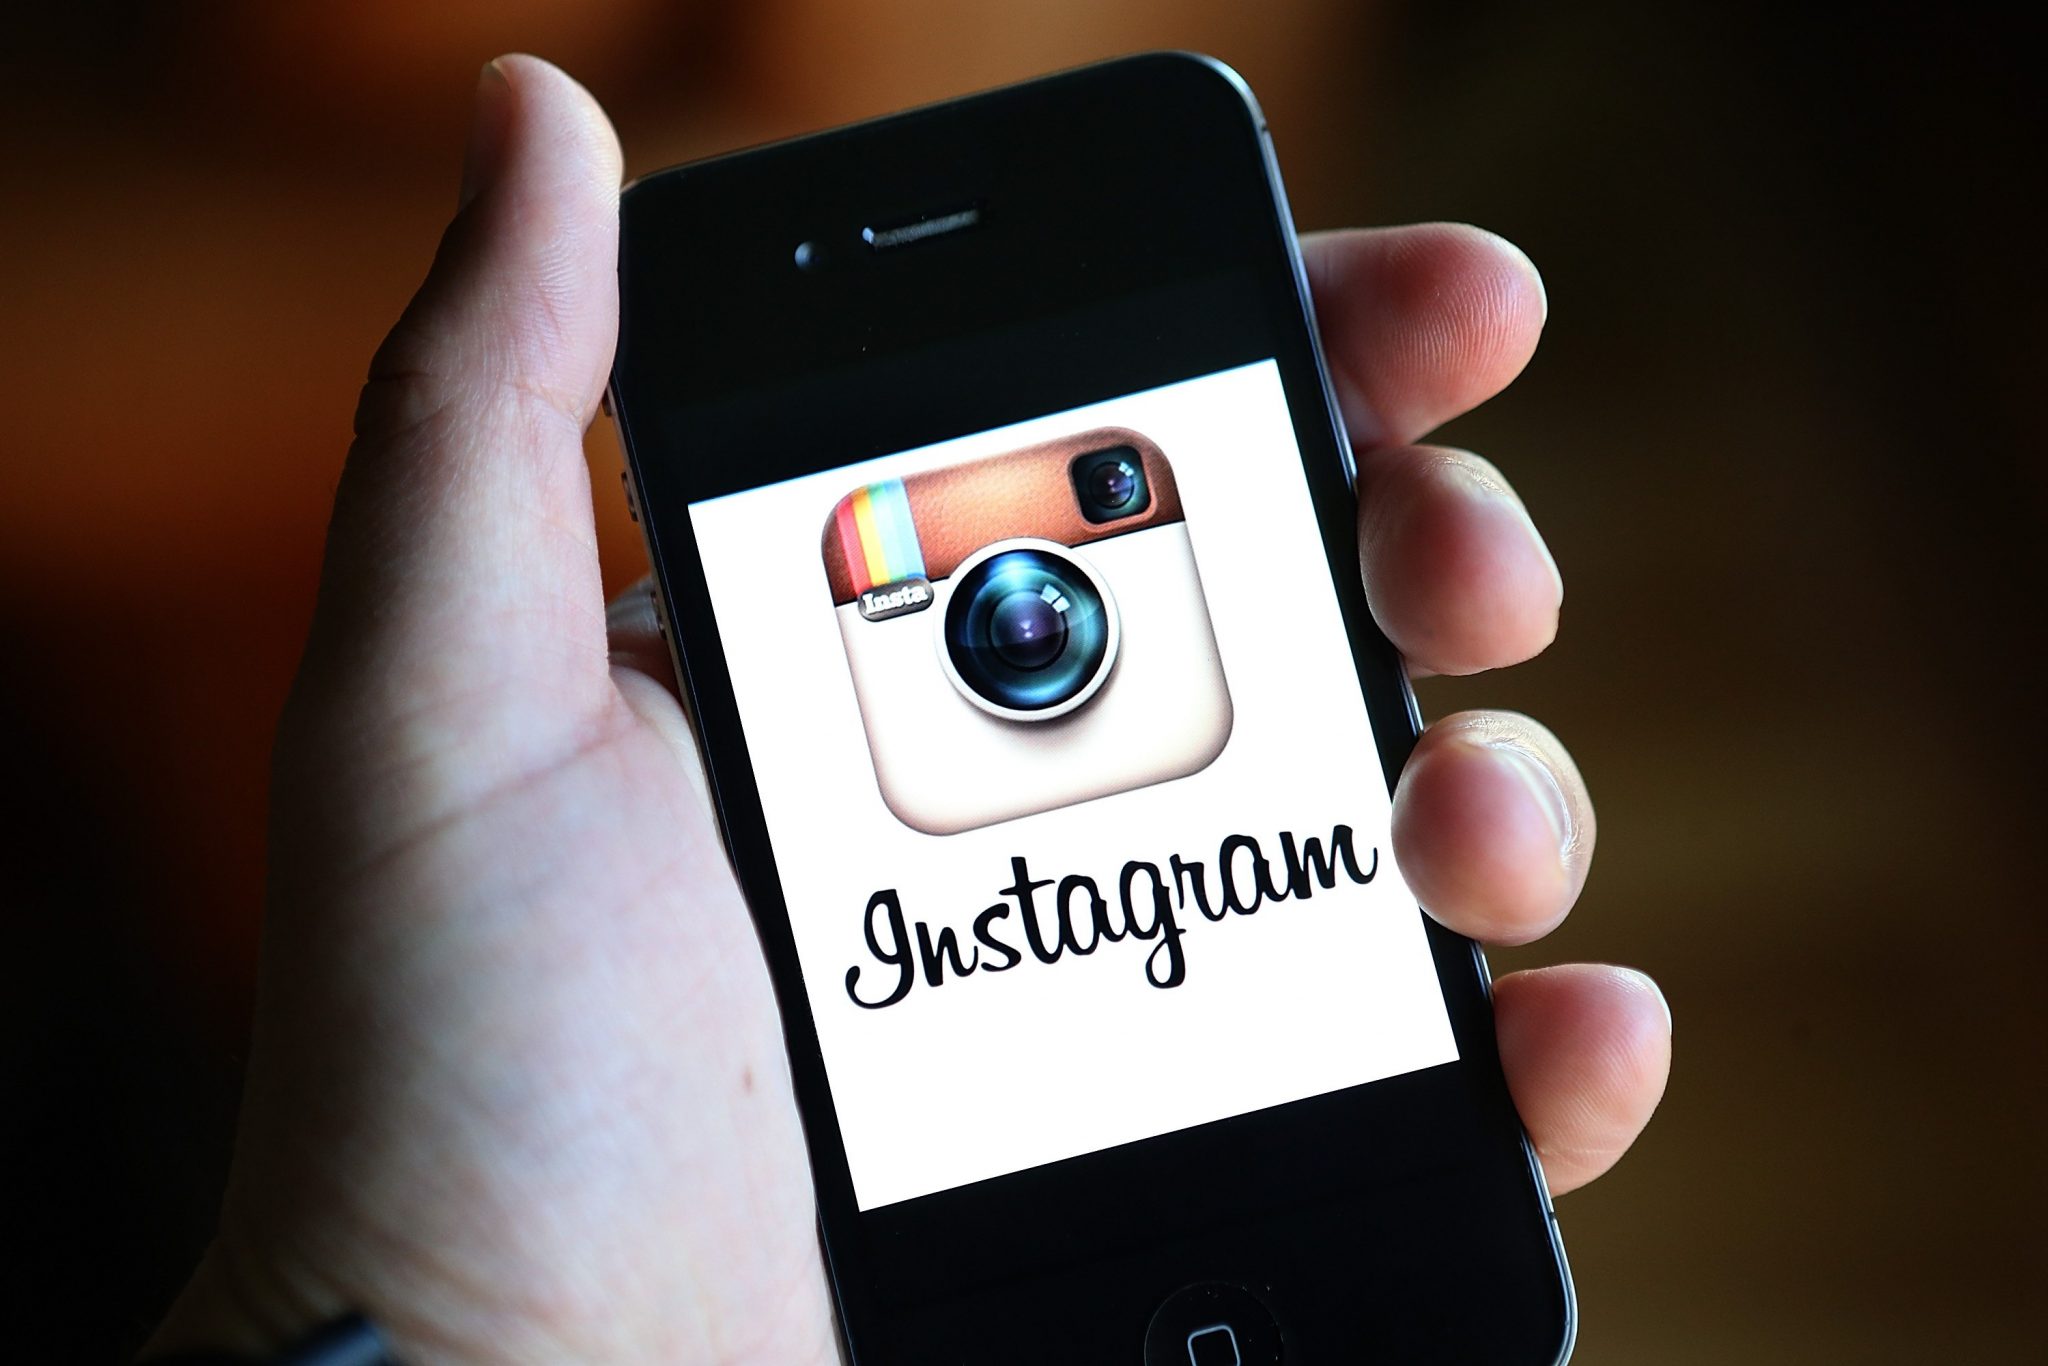 How To Temporarily Disable Or Delete Your Instagram Account